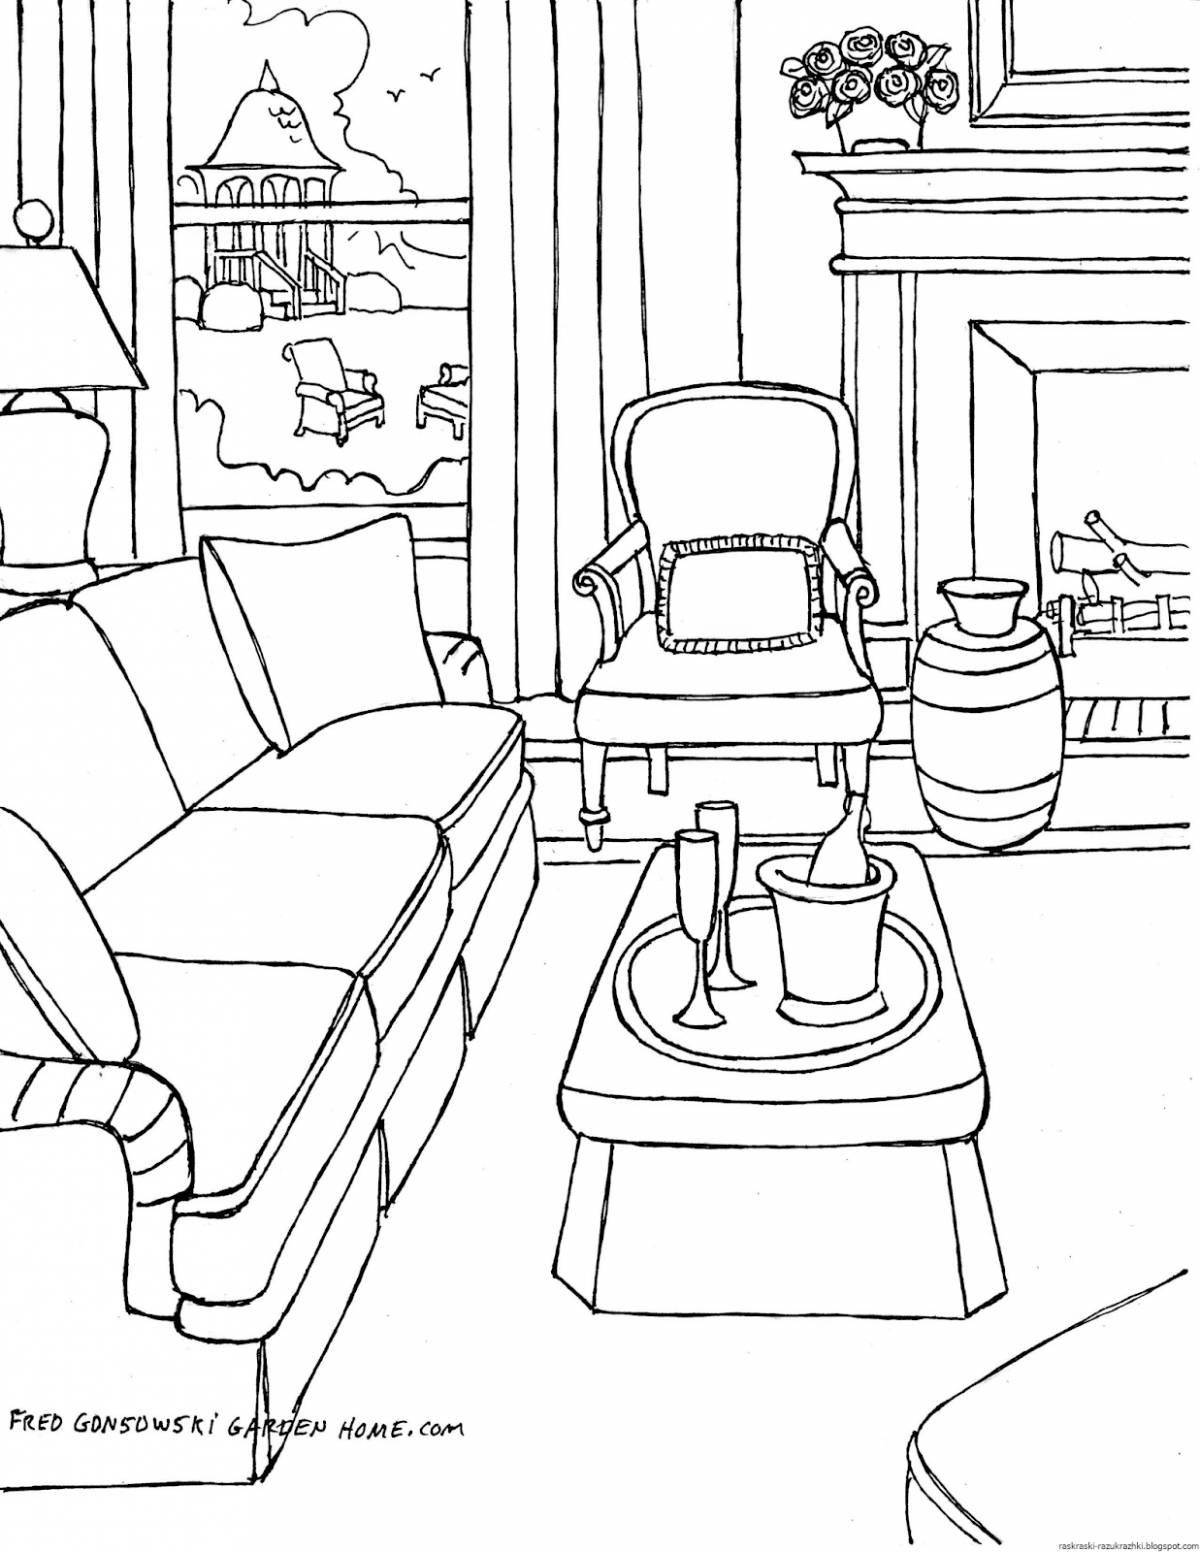 Relaxing home interior coloring book